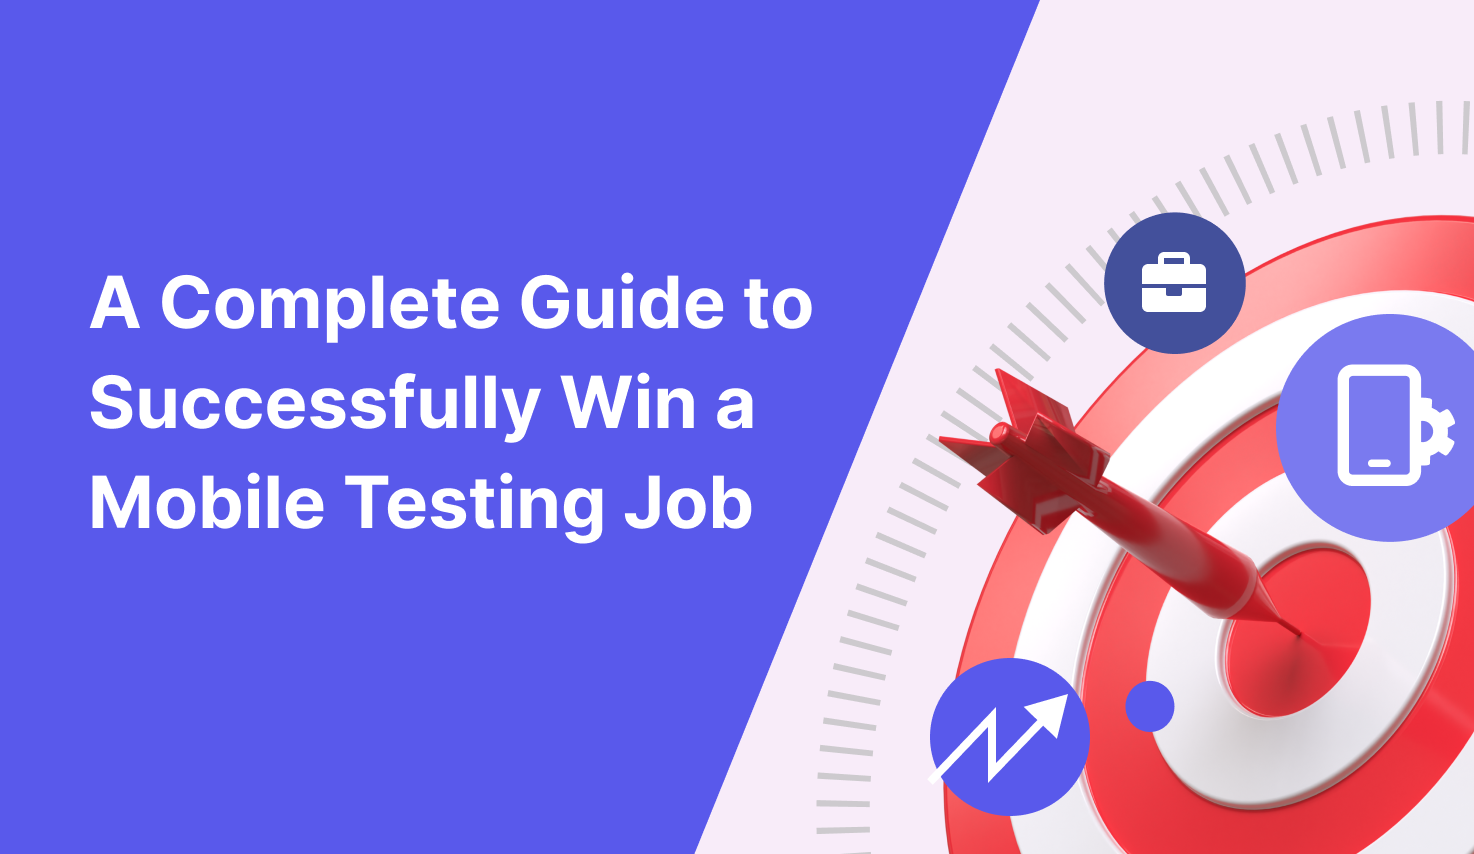 How To Get A Mobile Testing Job Fast - A Step By Step Guide